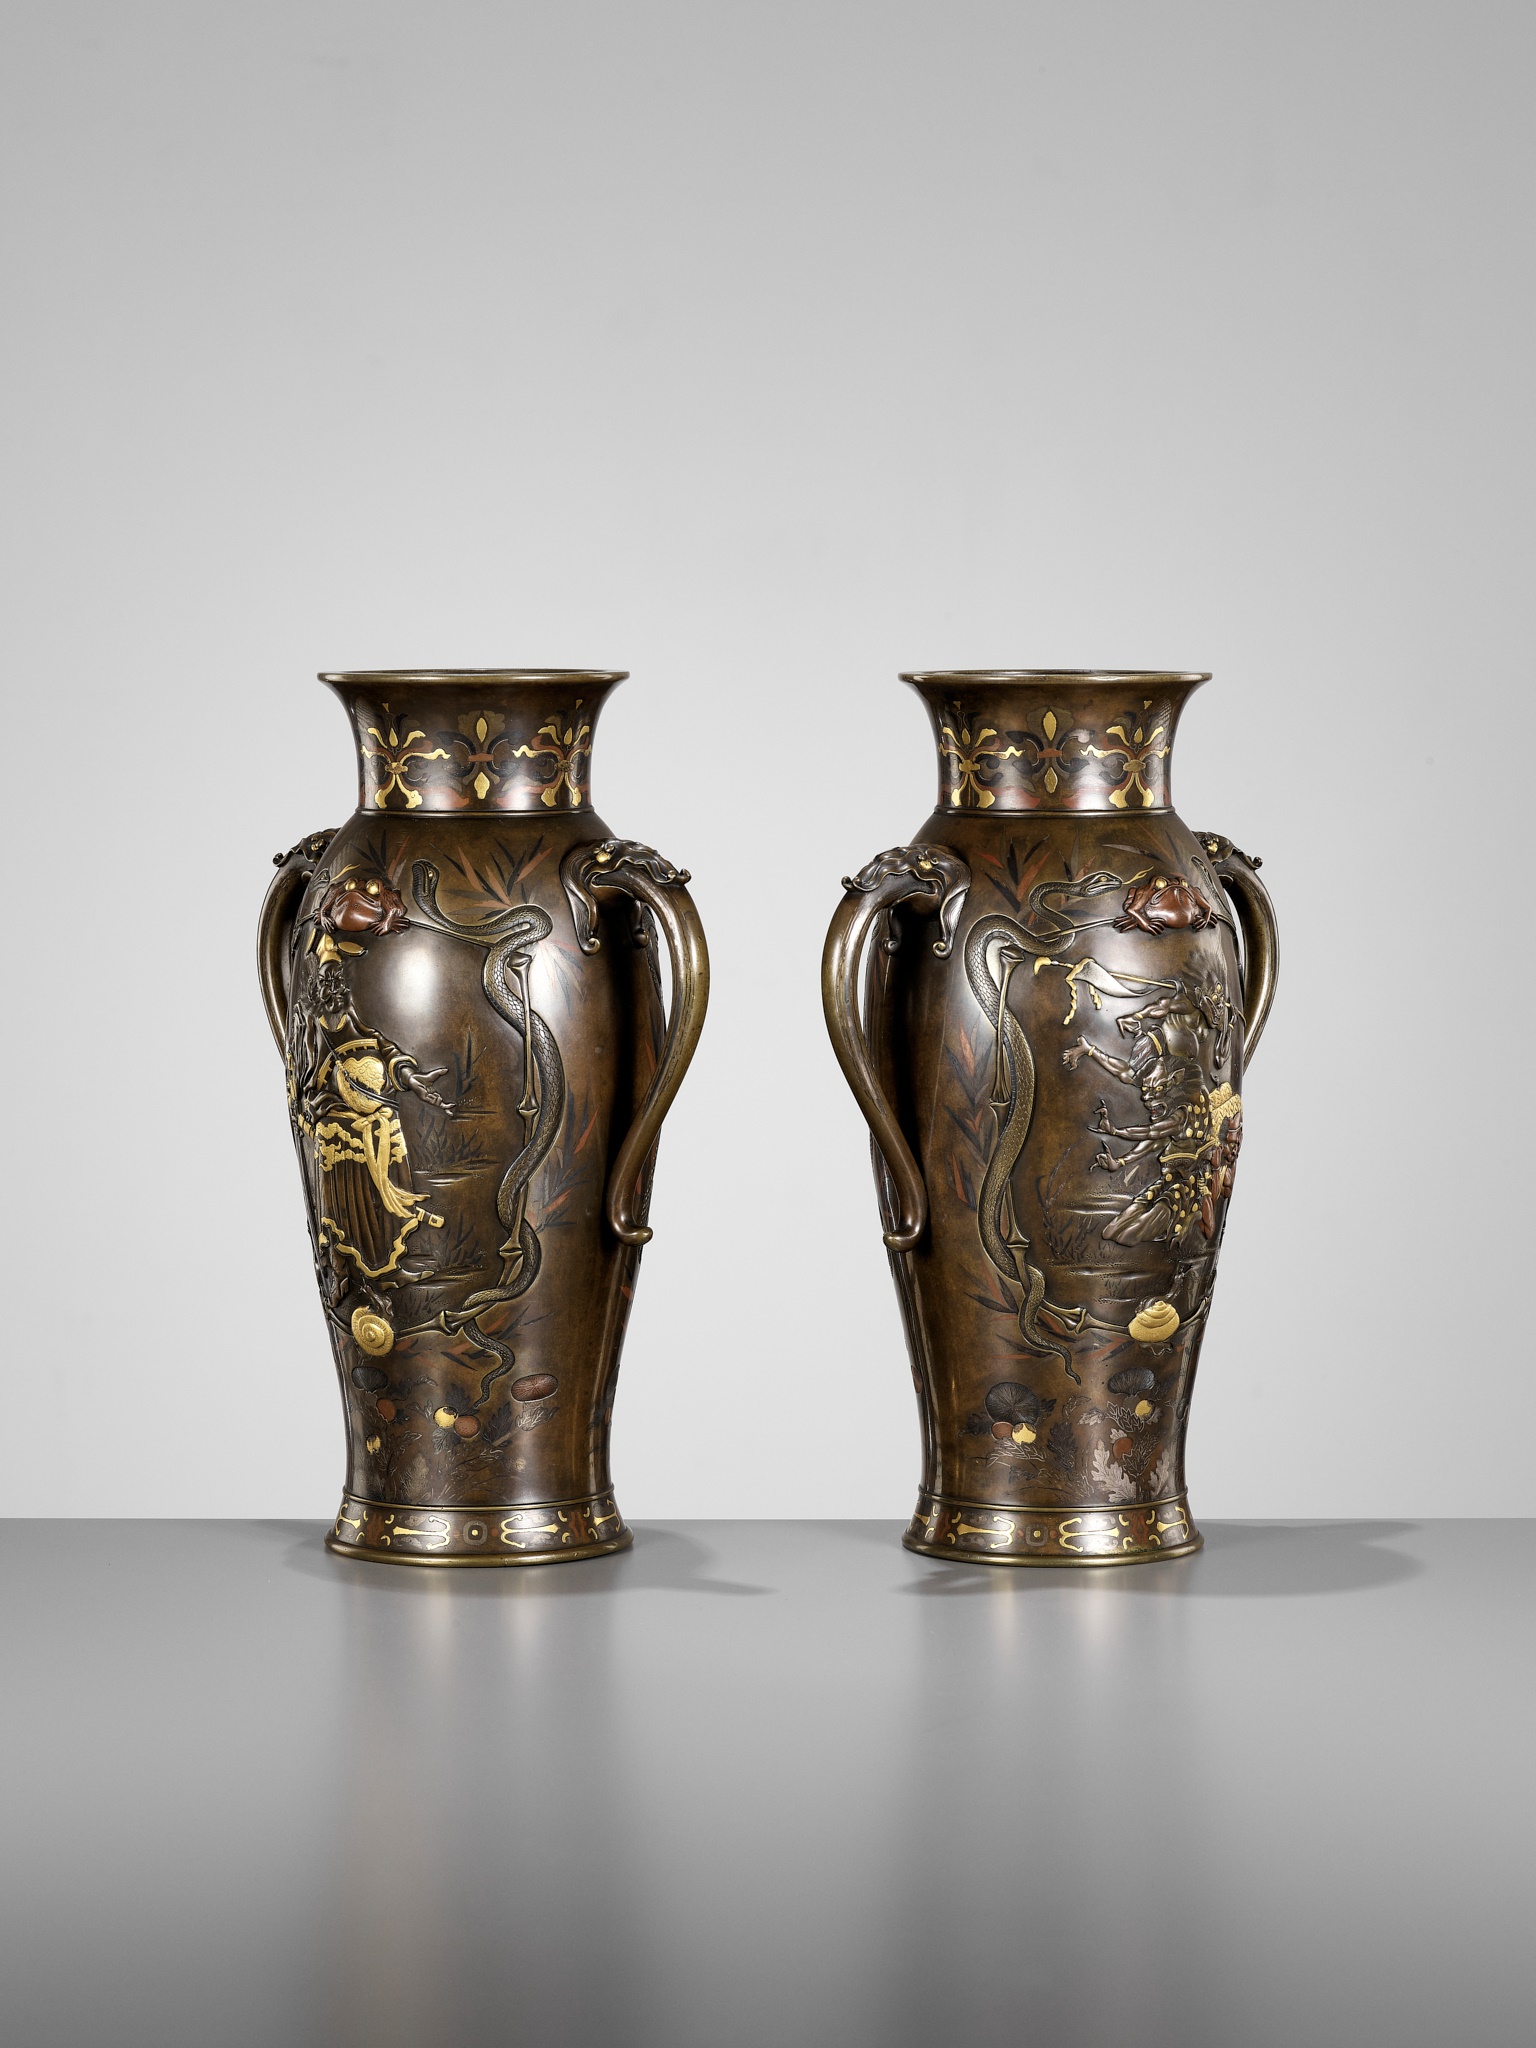 A SUPERB PAIR OF MIYAO-STYLE MIXED-METAL-INLAID AND PARCEL-GILT BRONZE VASES WITH SHOKI AND ONI - Image 12 of 15